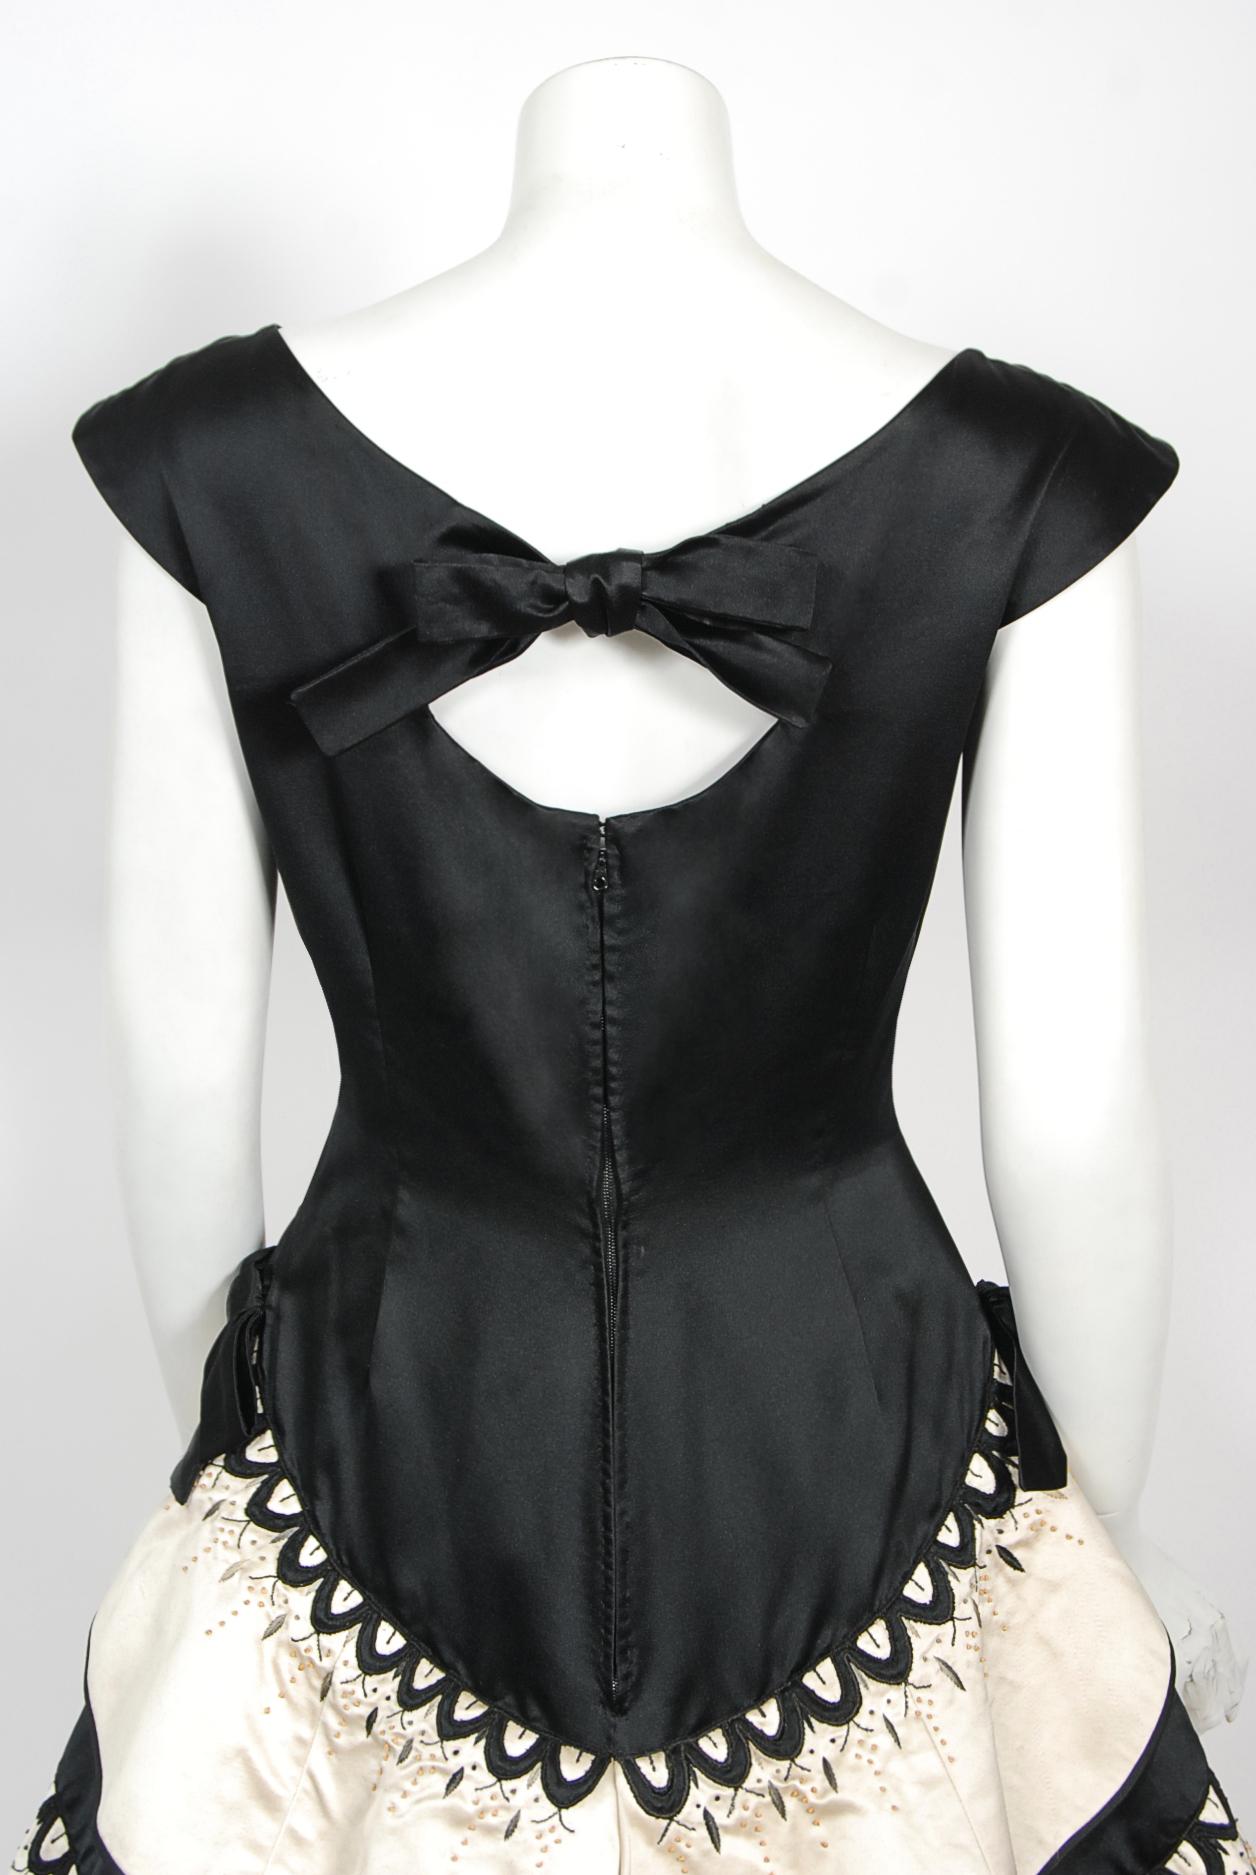 Vintage 1950's Emilio Schuberth Couture Black & Ivory Embroidered Satin Dress For Sale 11